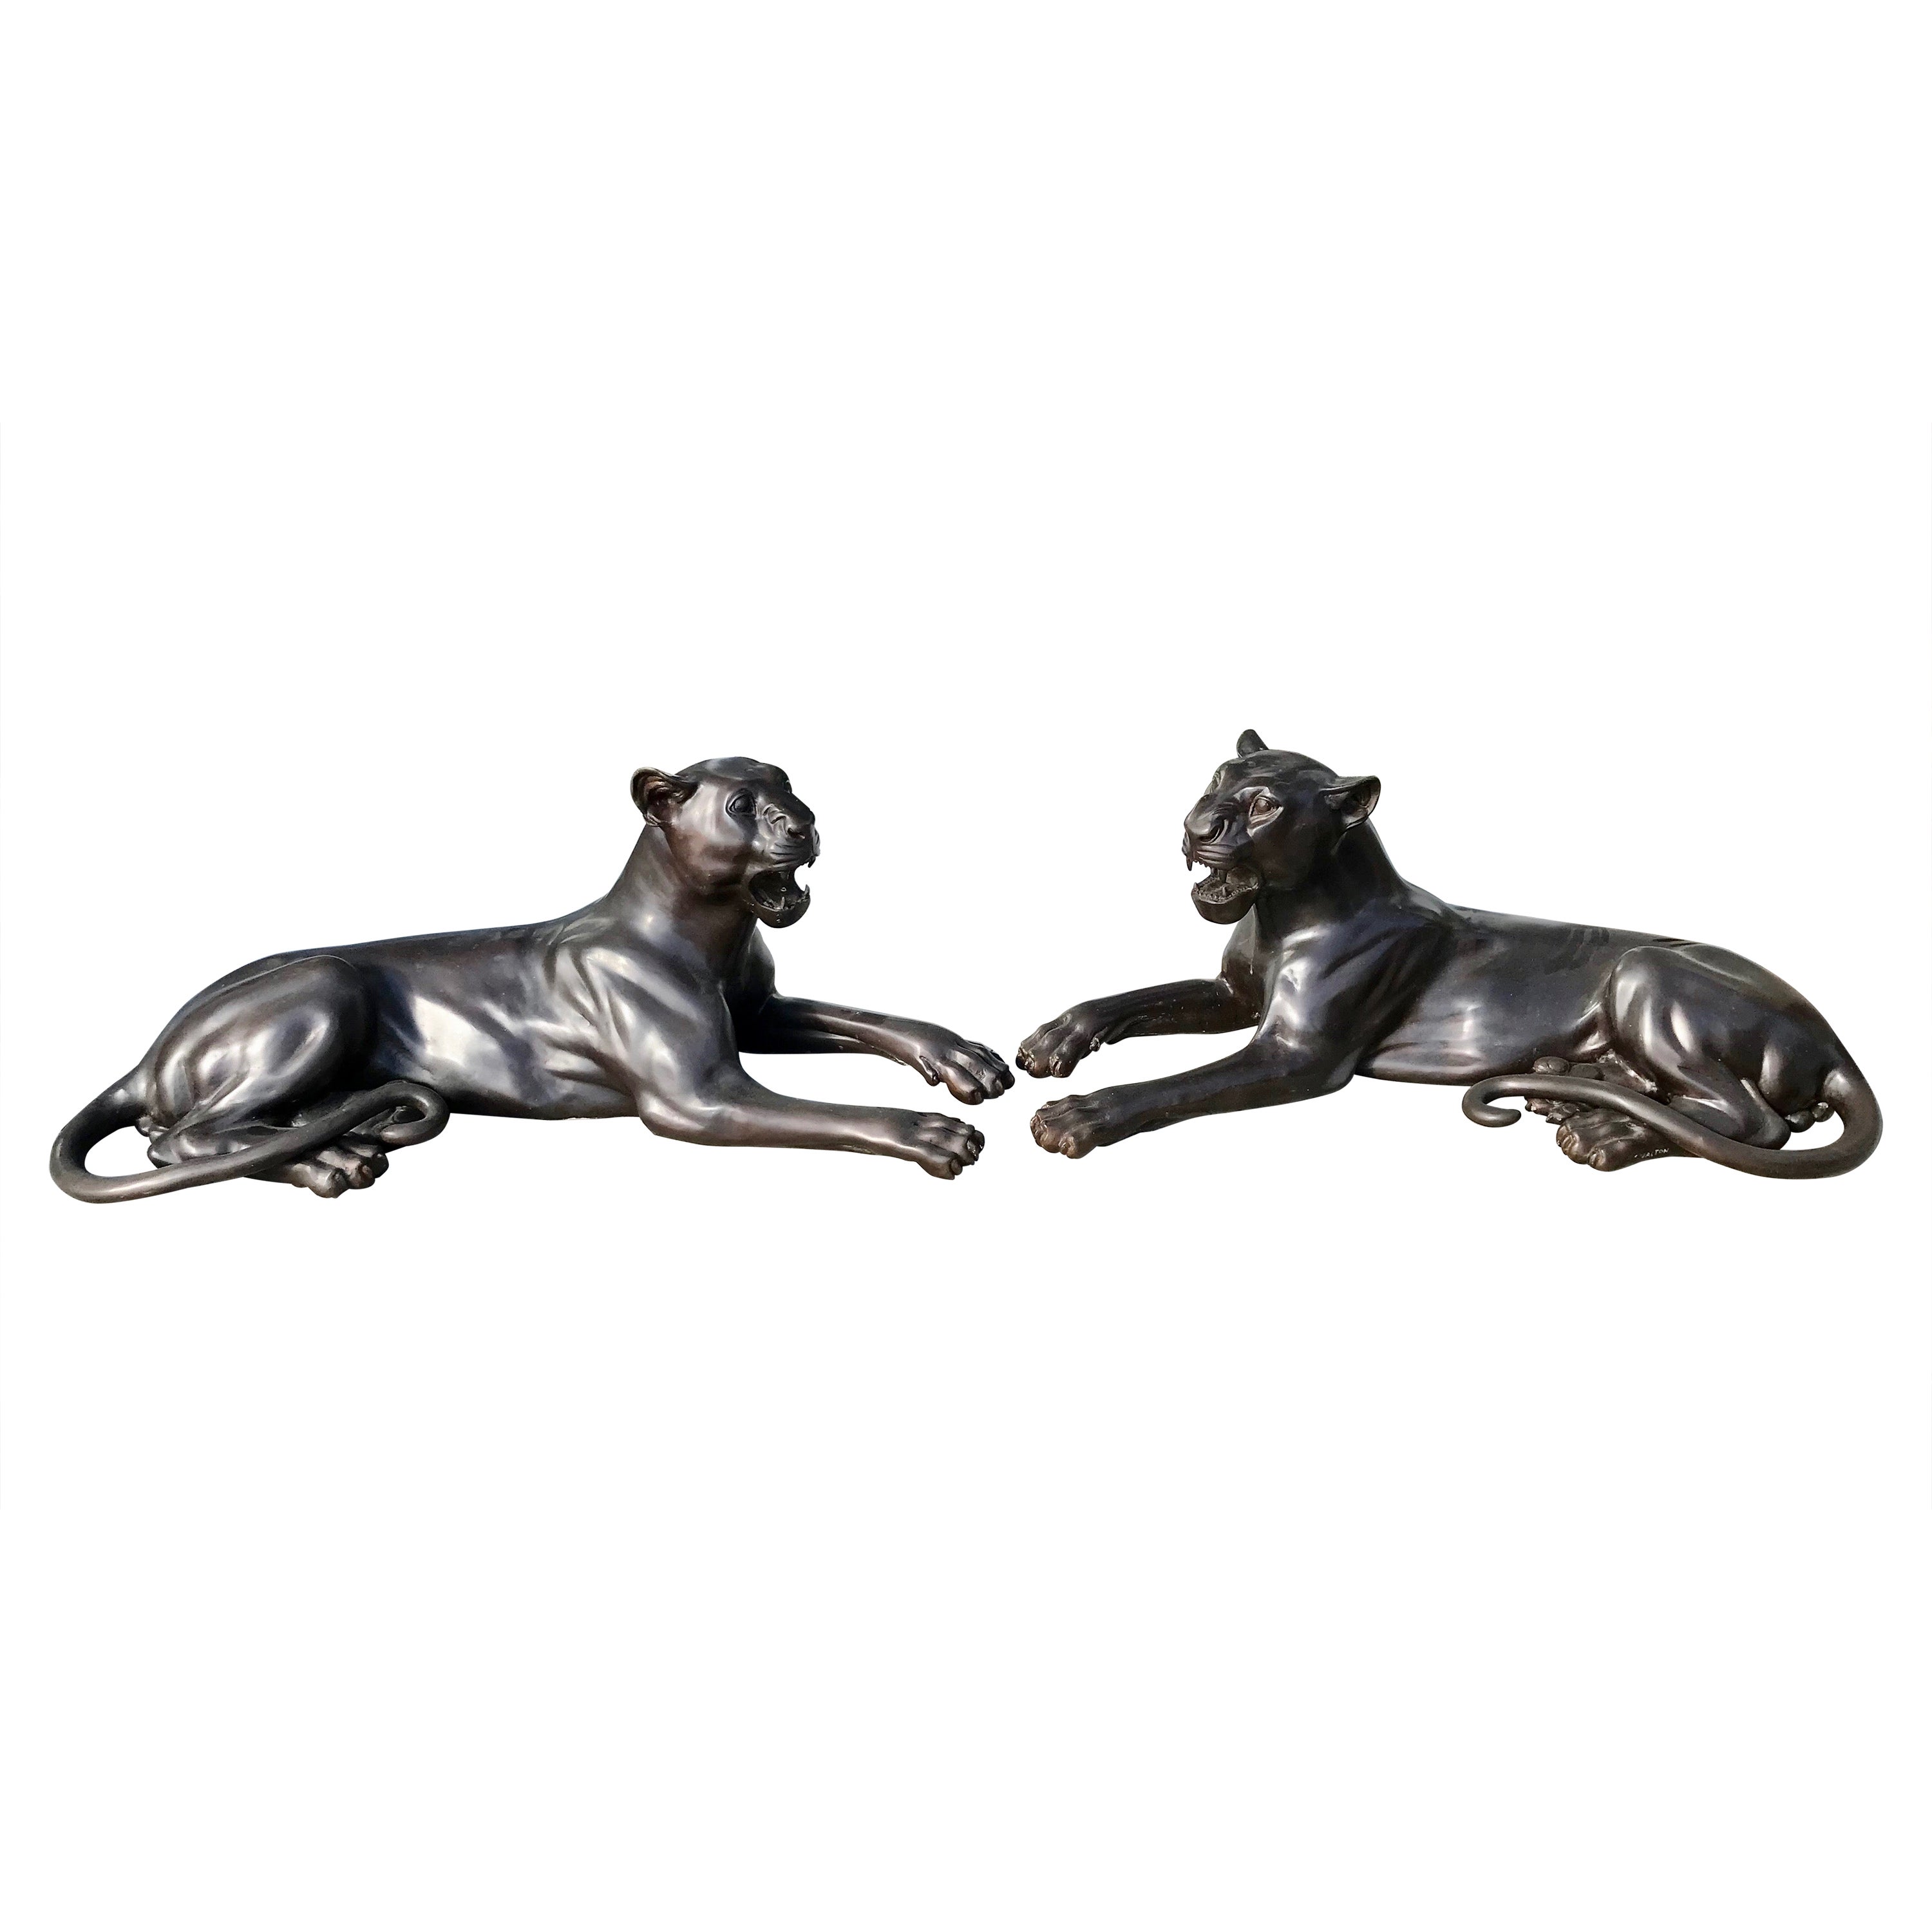 Pair of Life Size Bronze Figures of Panthers